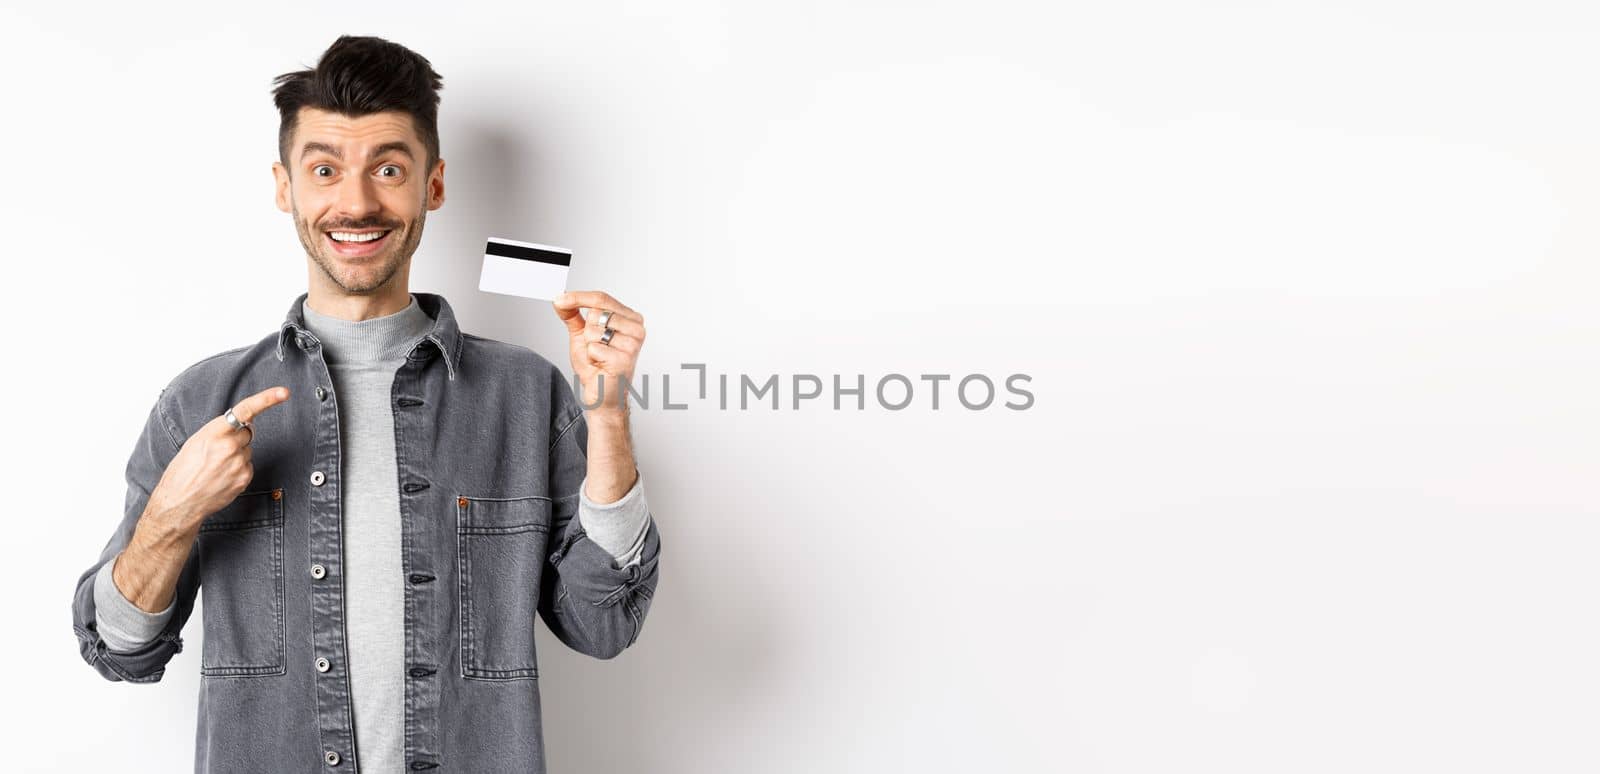 Excited handsome guy with moustache pointing finger at plastic credit card, smiling pleased, recommend good deal, standing on white background.